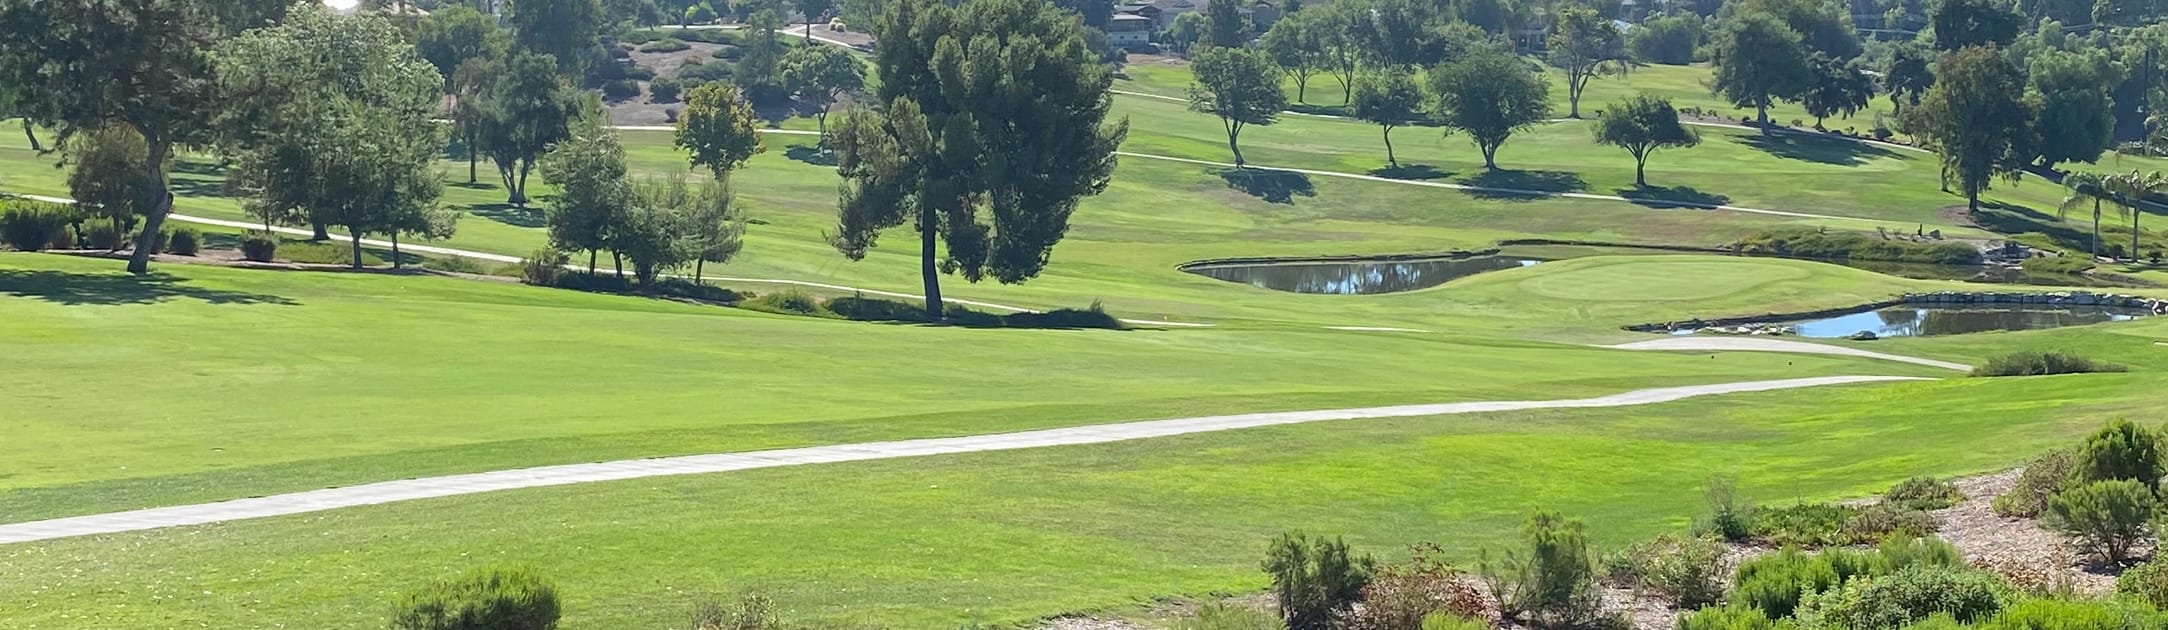 Golf course with trees and water features.